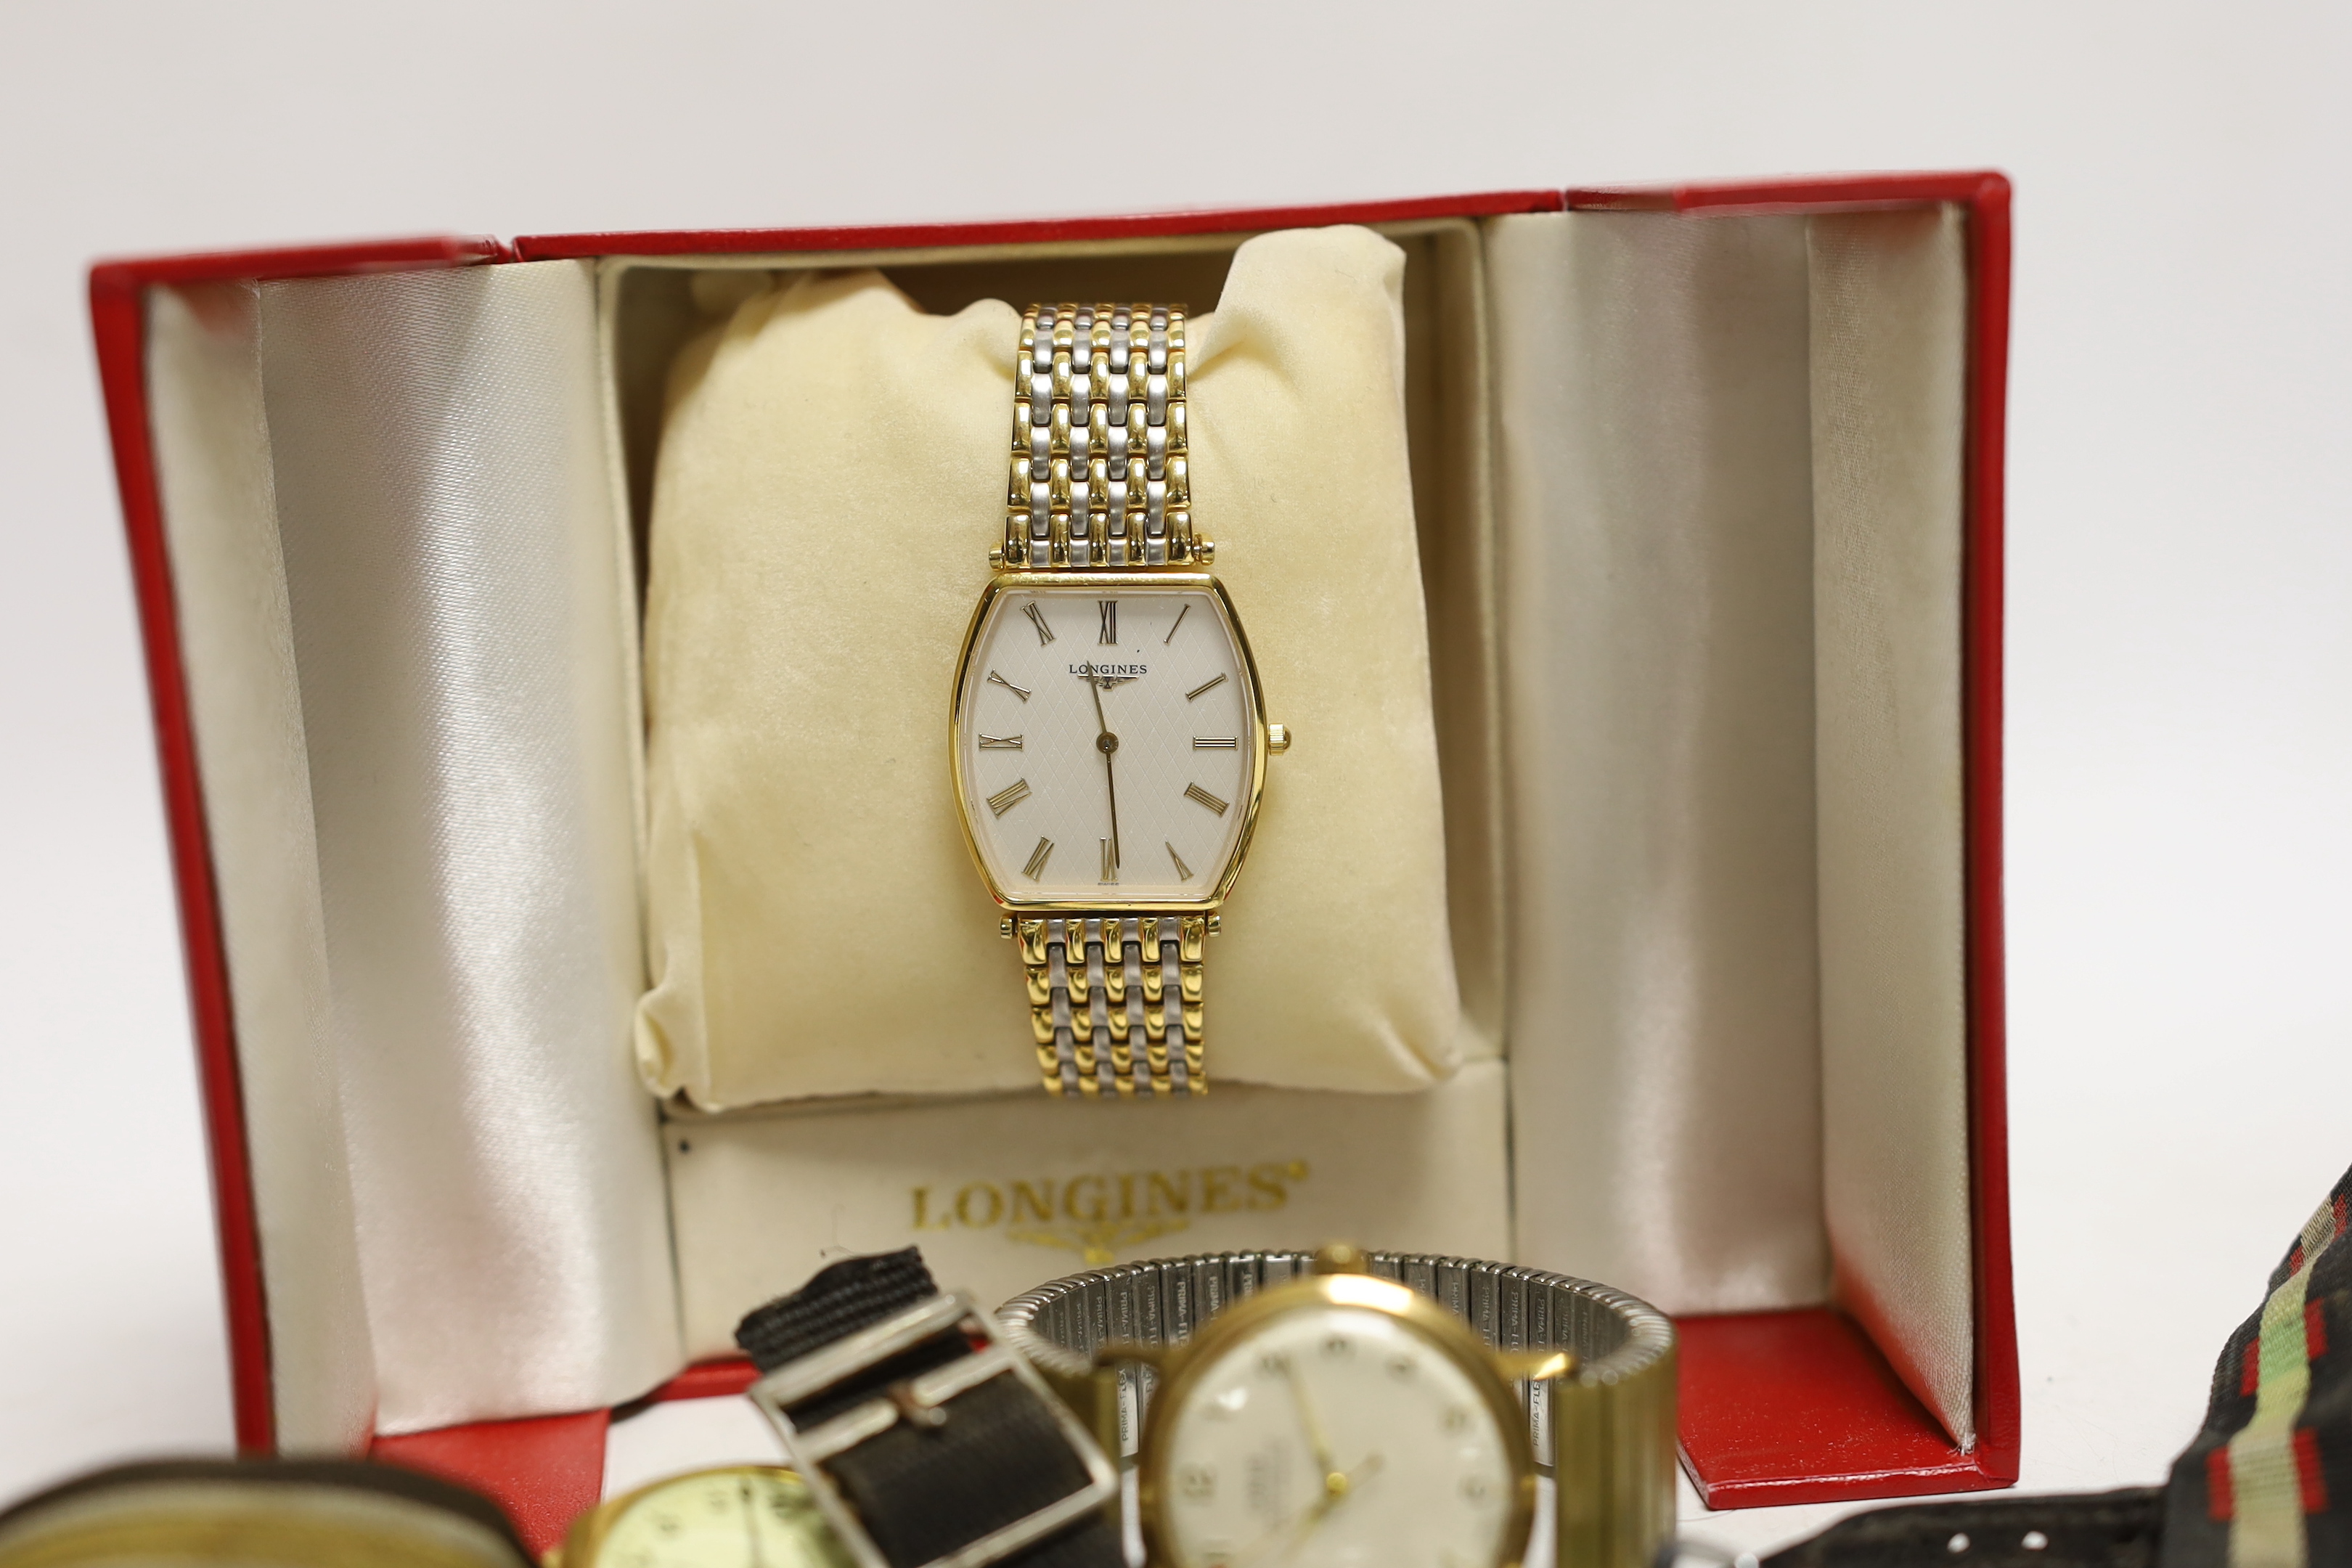 A gentleman's steel and gold plated Longines quartz wrist watch, with box, a lady's steel Jaeger LeCoultre manual wind wrist watch and eight other assorted gentleman's wrist watches including Ingersoll, Accurist and Oris